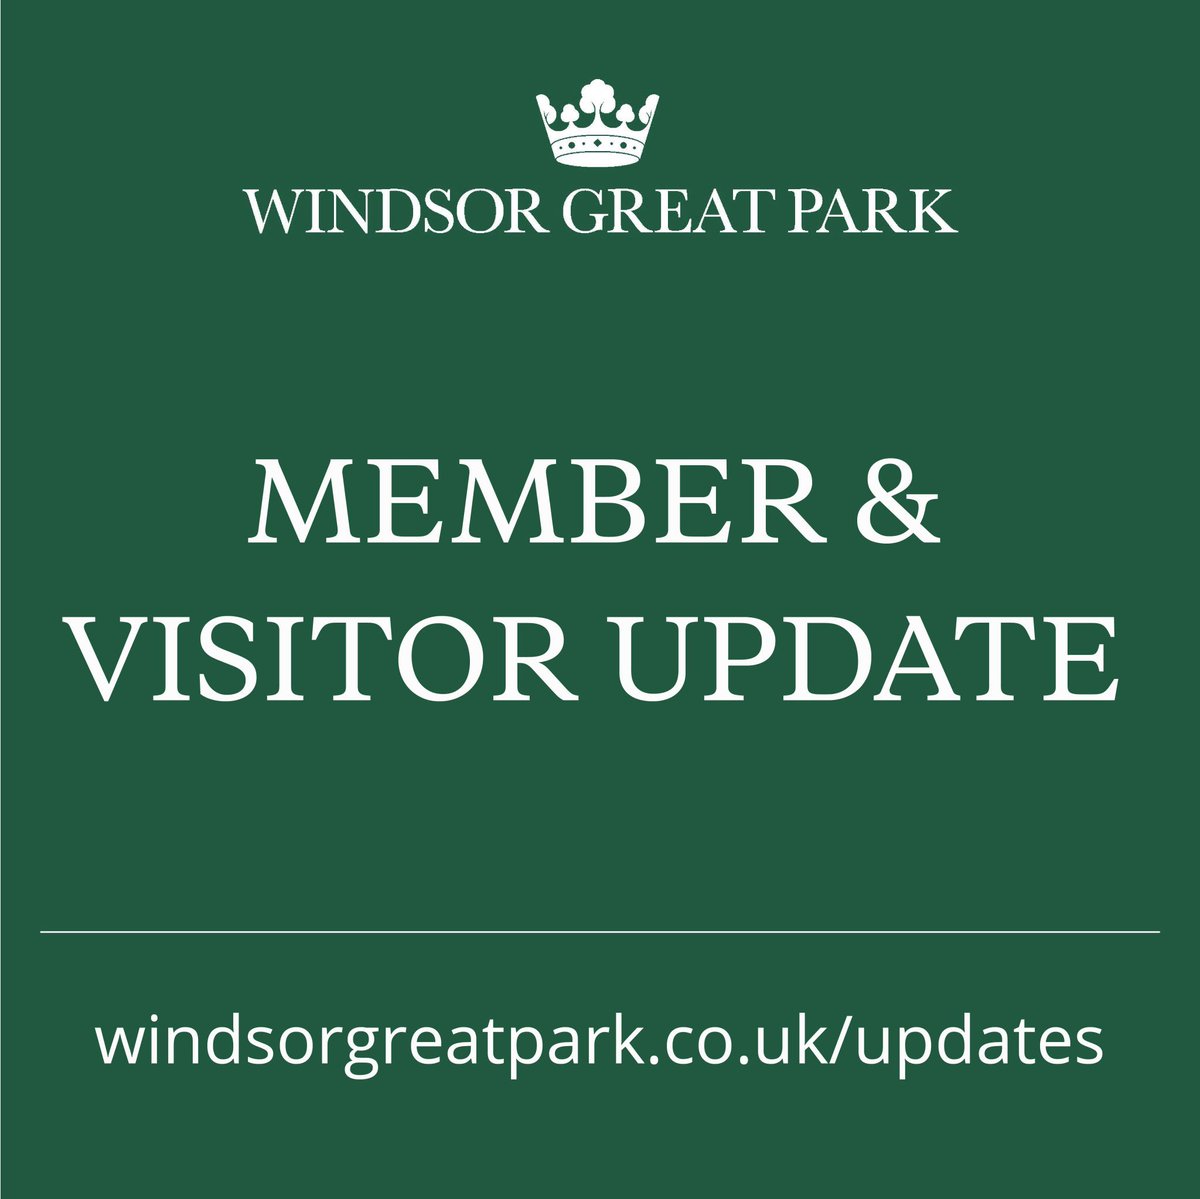 Please be aware of upcoming essential work scheduled on the south side of Virginia Water Lake for Tuesday 23 April. This work may impact on your visit, please check our visitor updates for further information. windsorgreatpark.co.uk/visitorupdates